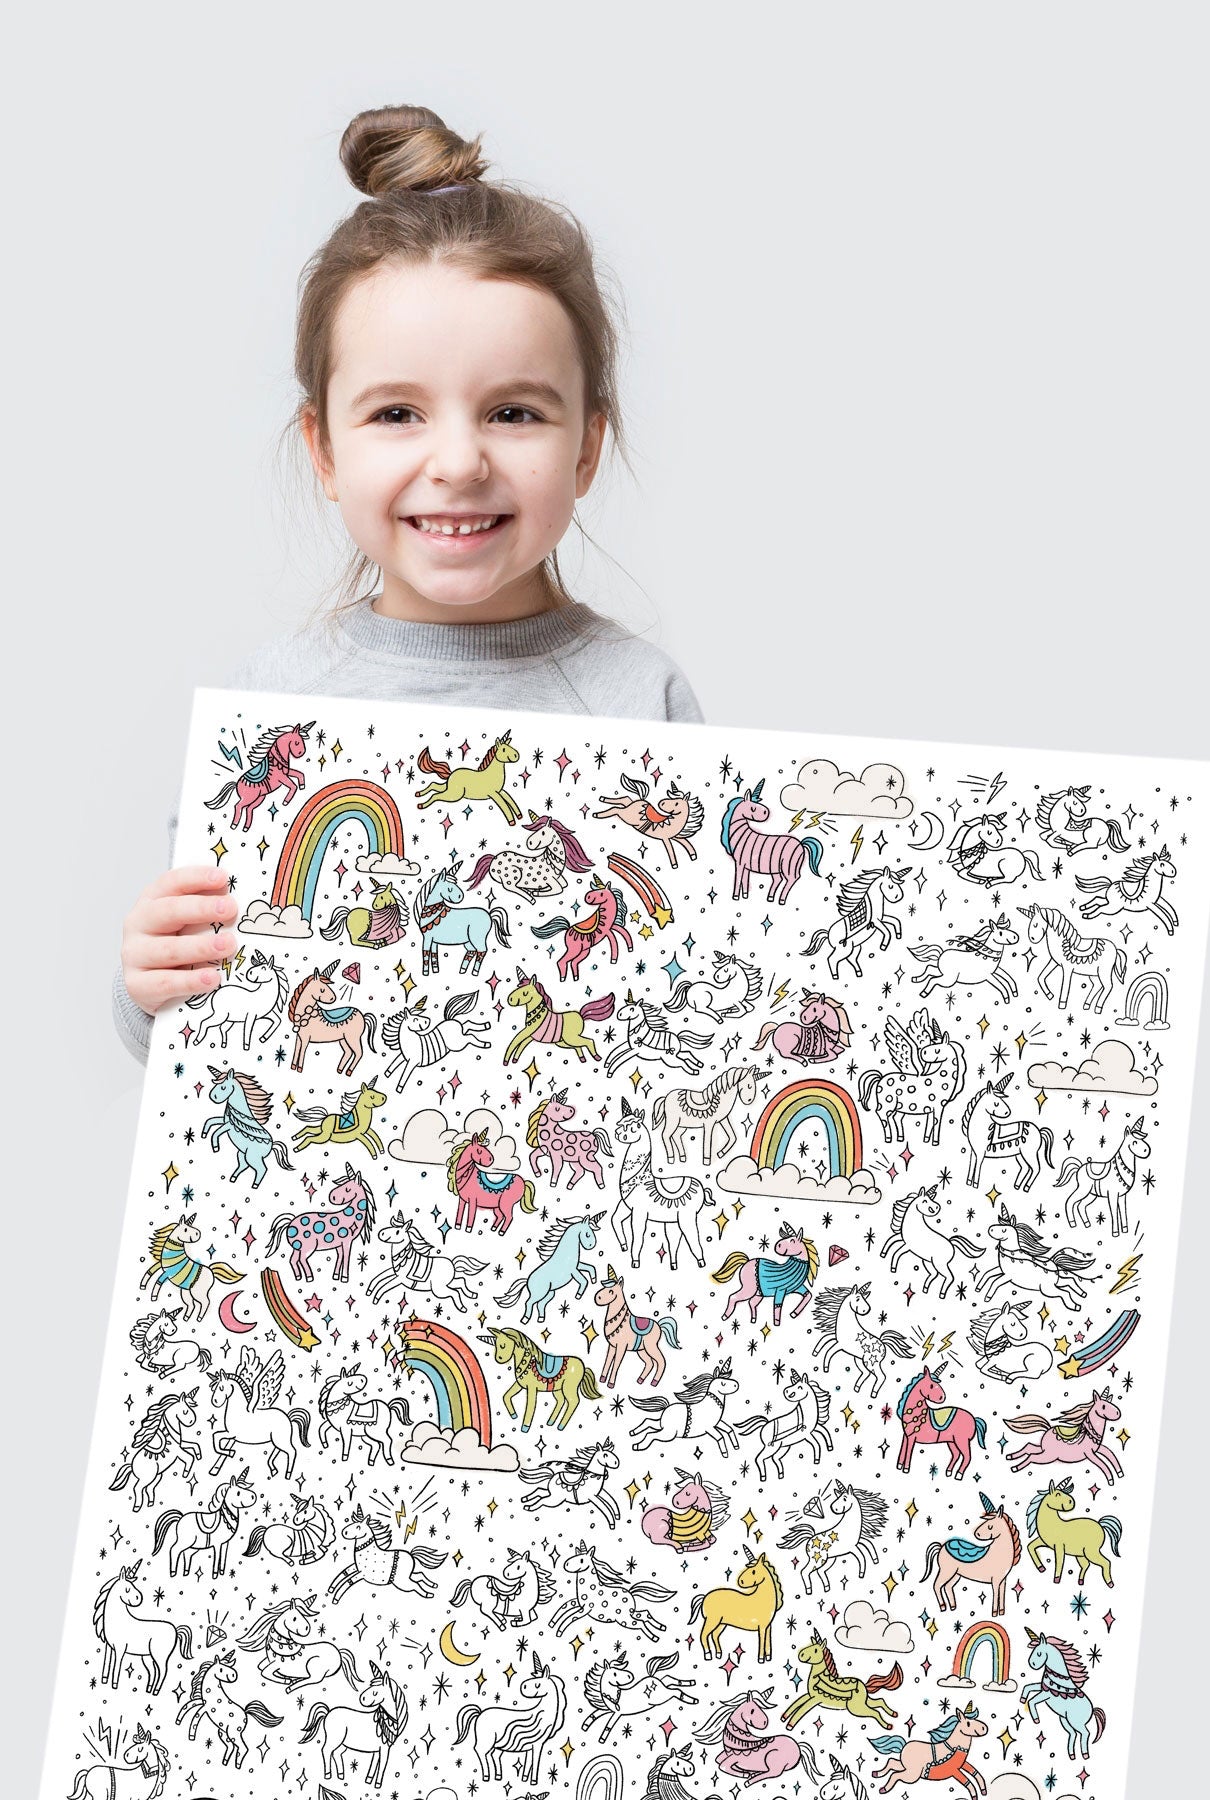 Coloring Books For Girls: Unicorns: Detailed Unicorn Drawings for